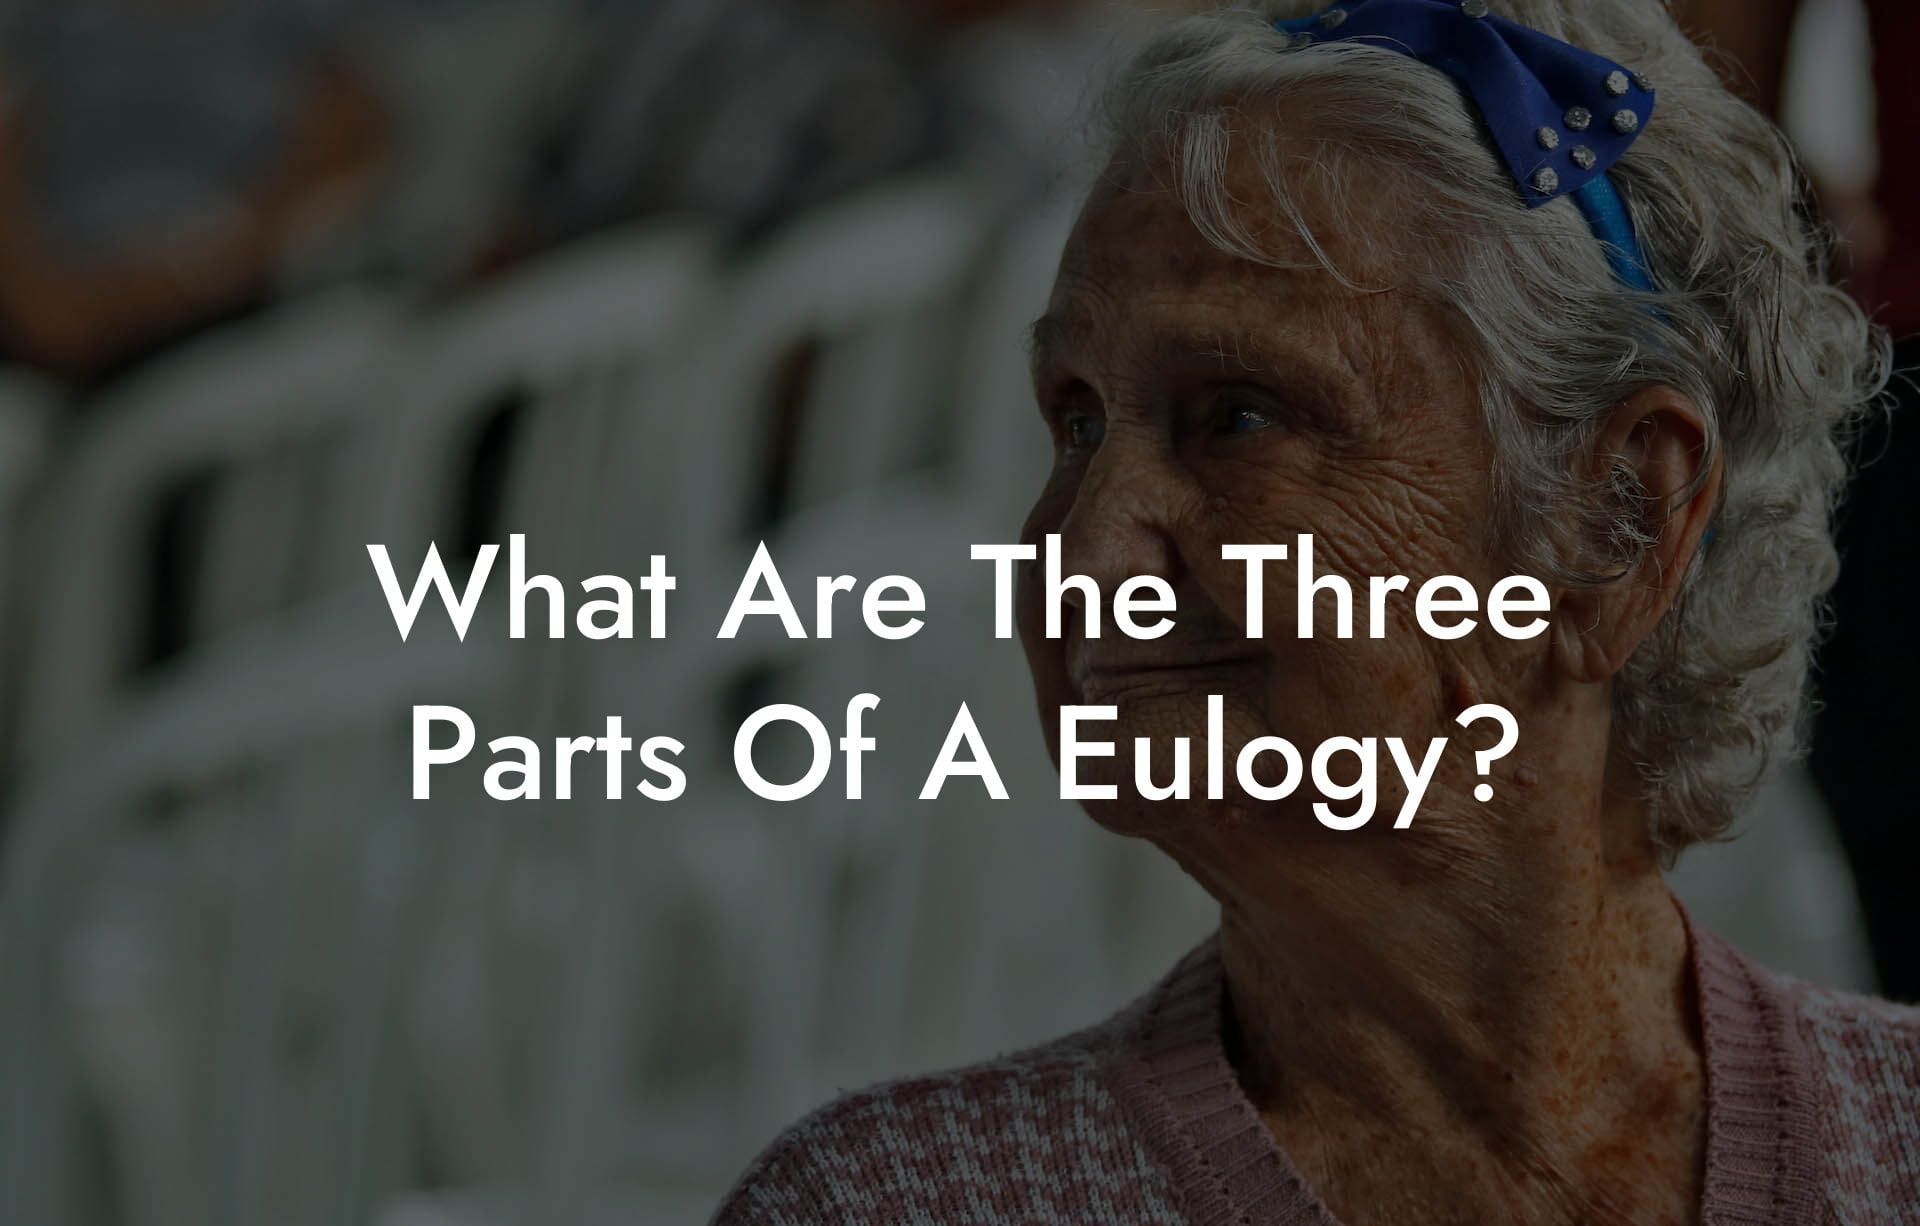 What Are The Three Parts Of A Eulogy?